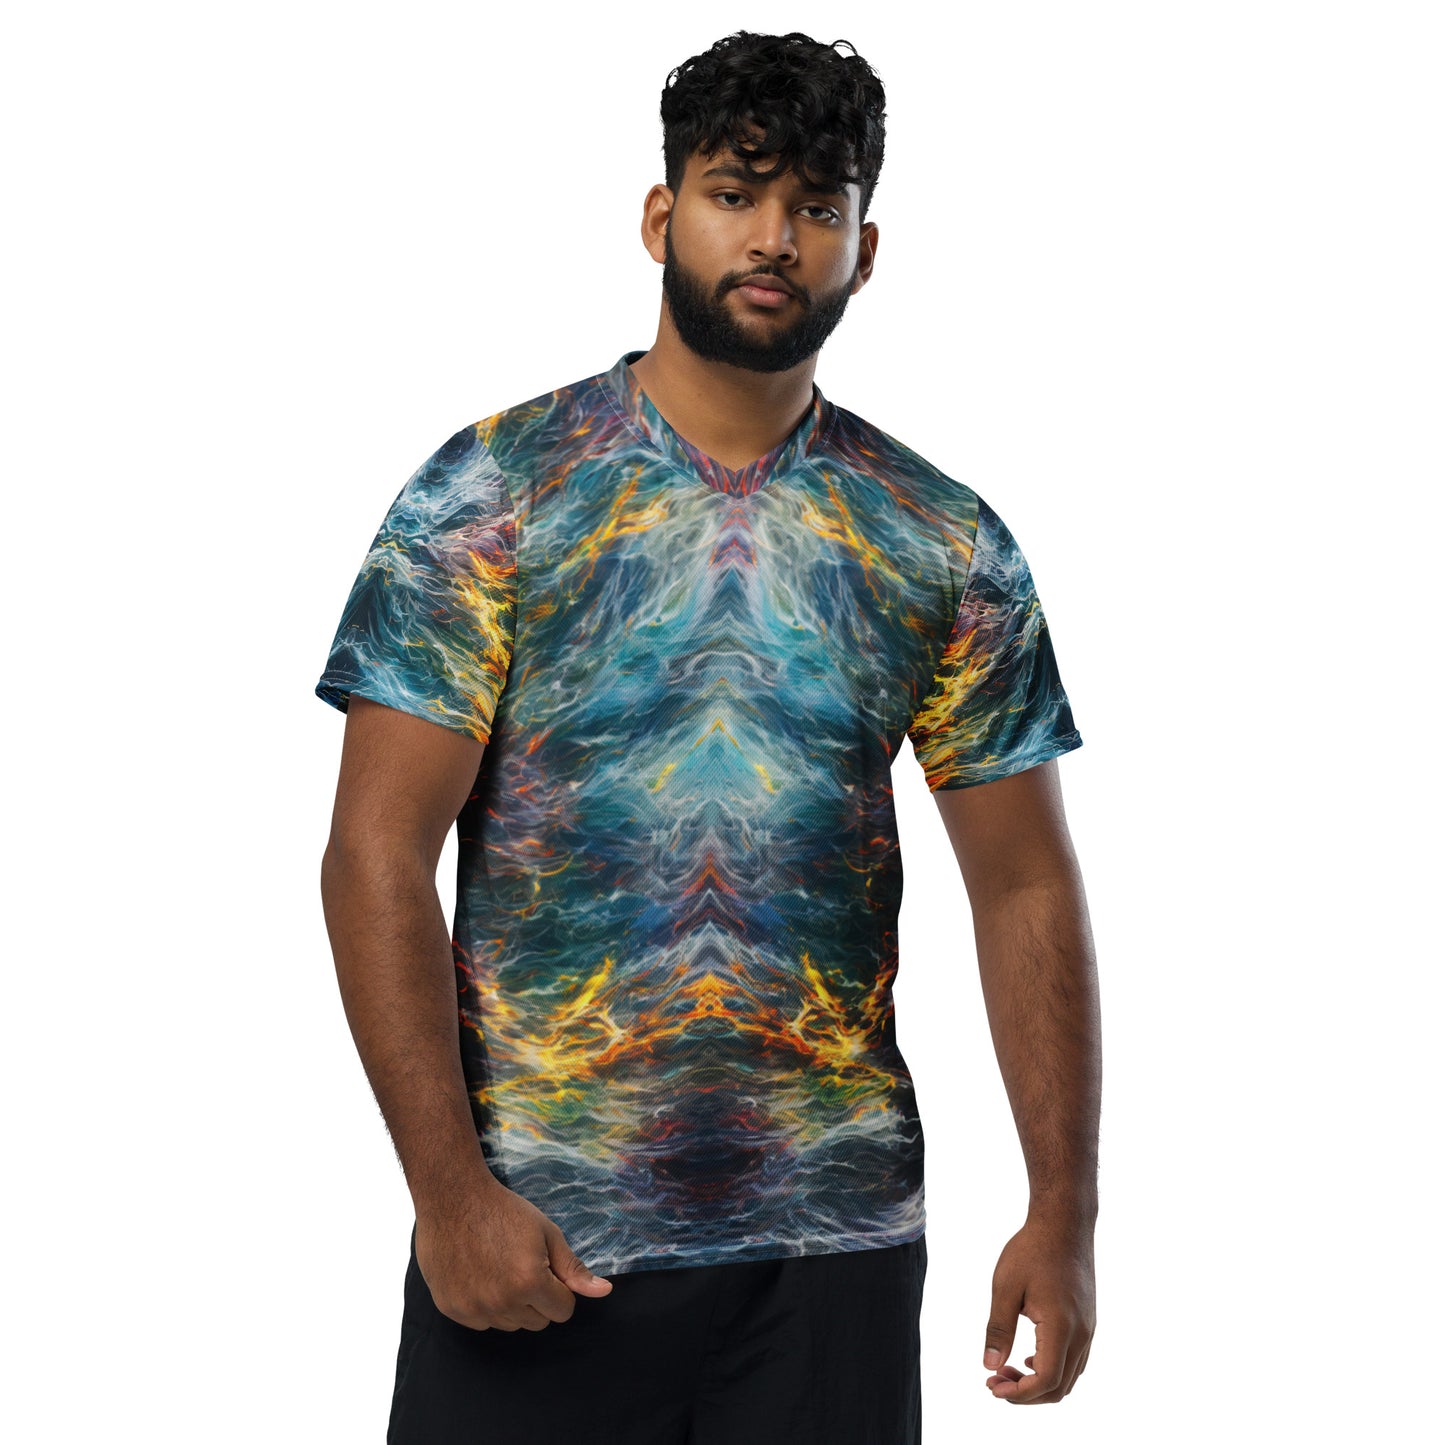 Distorted Universe : Recycled unisex sports jersey